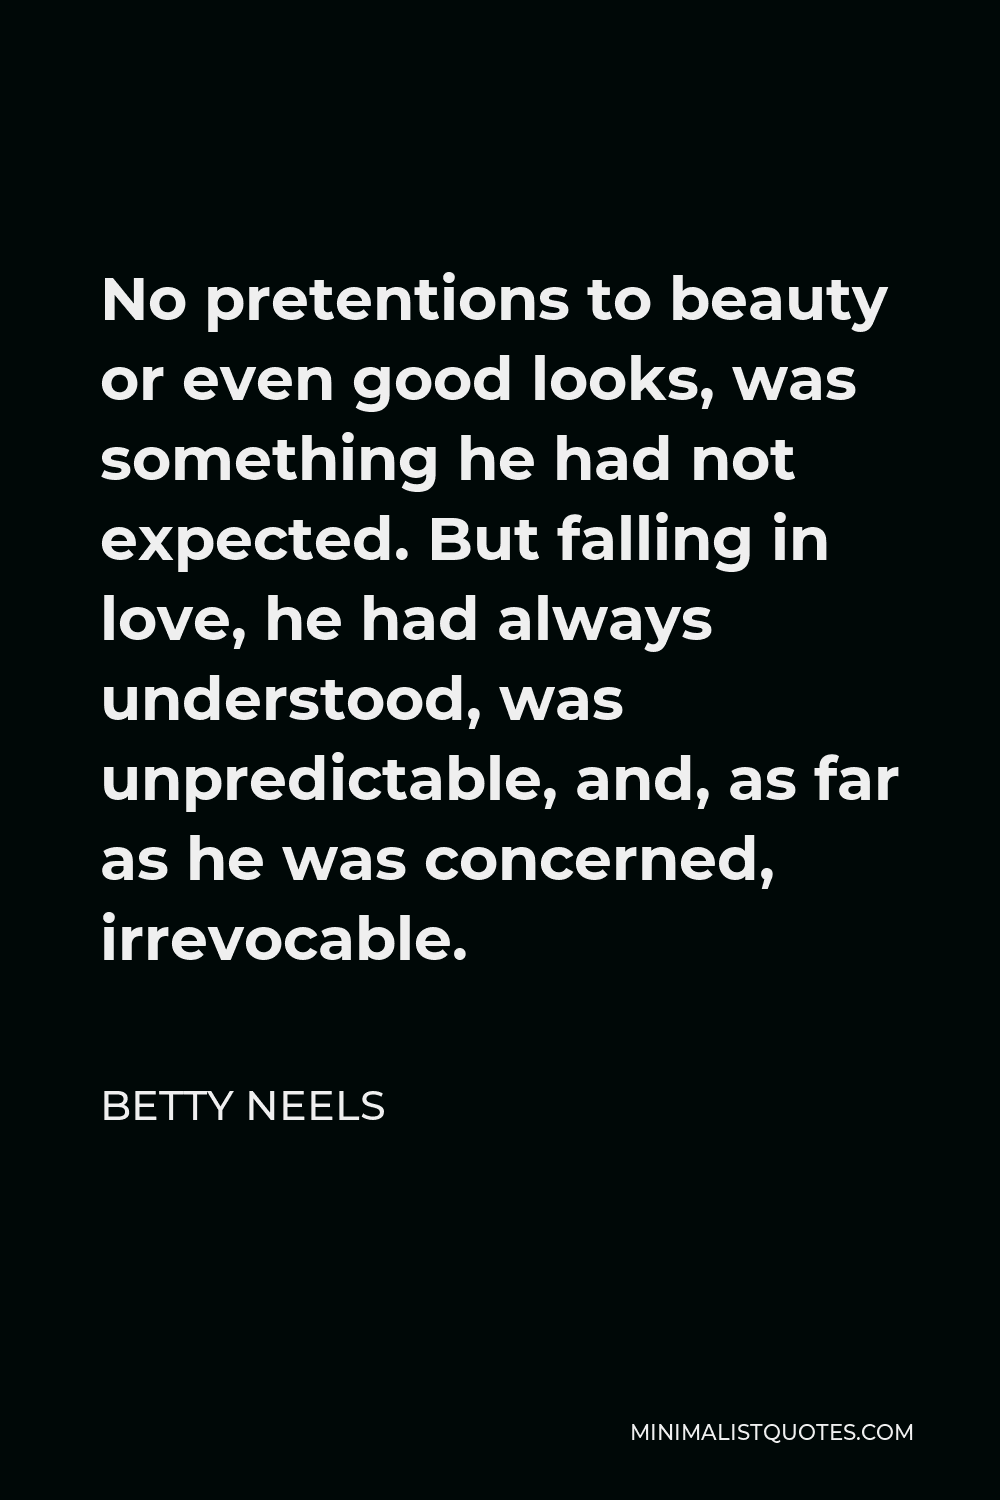 Betty Neels Quote - No pretentions to beauty or even good looks, was something he had not expected. But falling in love, he had always understood, was unpredictable, and, as far as he was concerned, irrevocable.